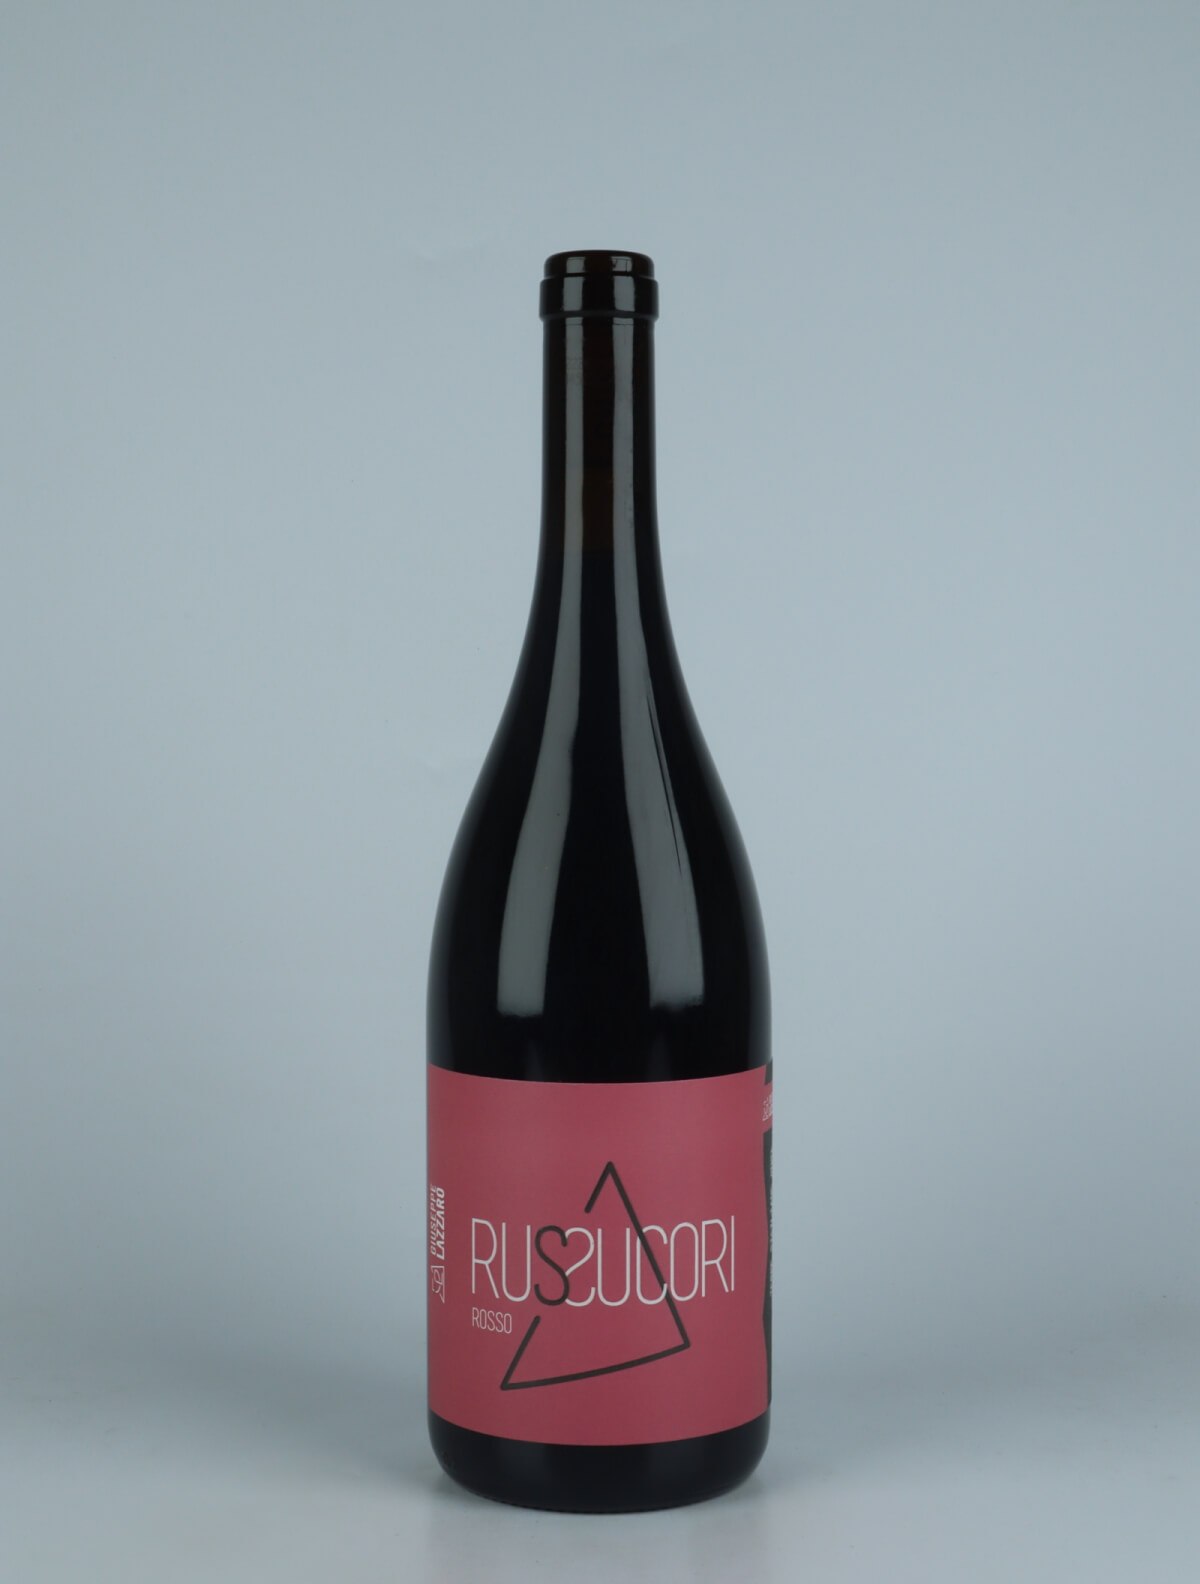 A bottle 2021 Russucori Red wine from Giuseppe Lazzaro, Sicily in Italy